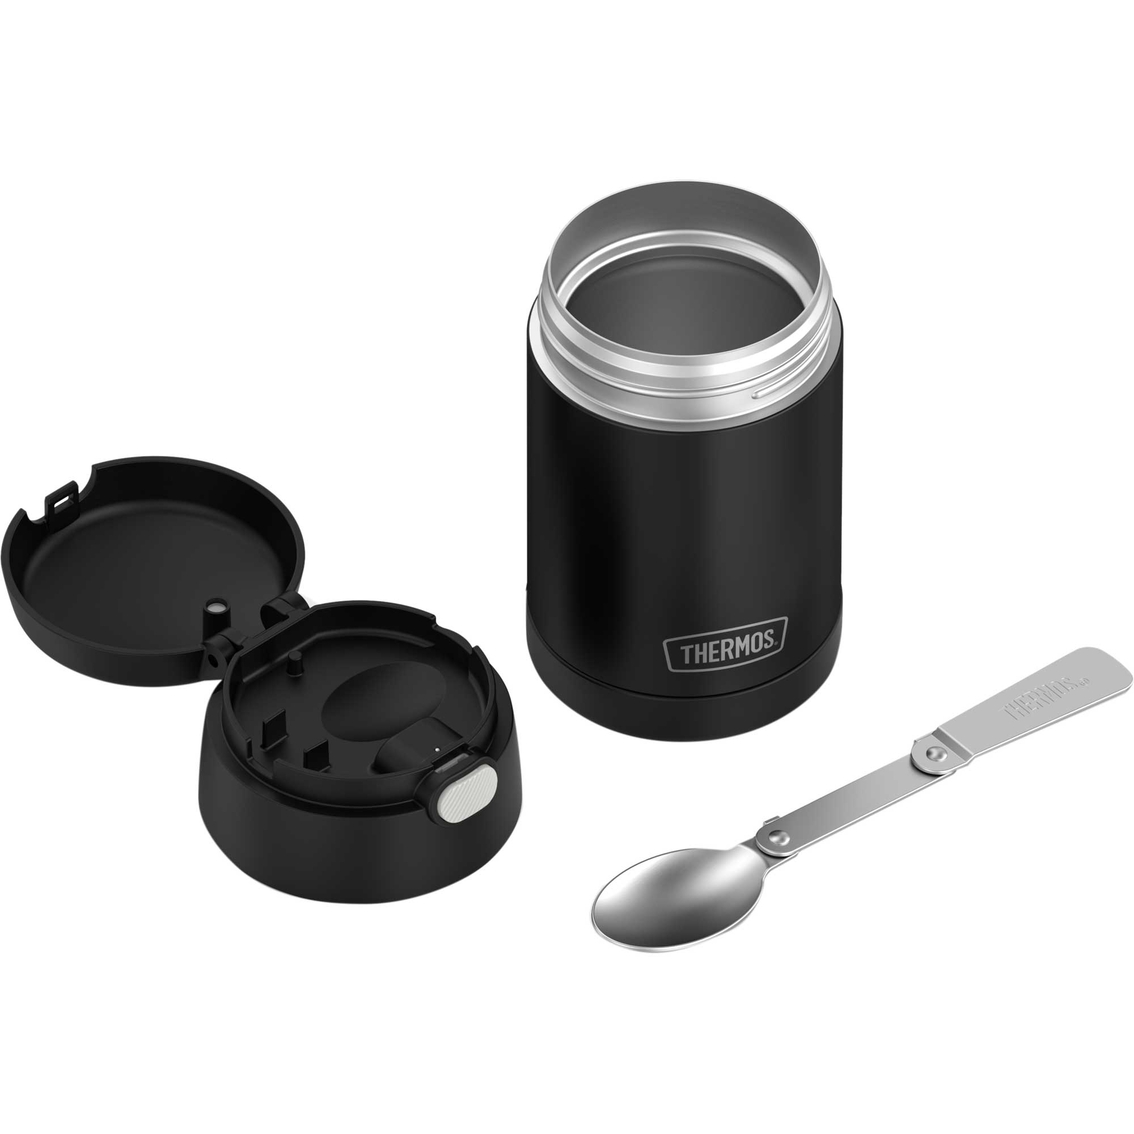 Thermos 16 oz. Stainless Steel Non-Licensed Funtainer Food Jar with Folding Spoon - Image 5 of 5